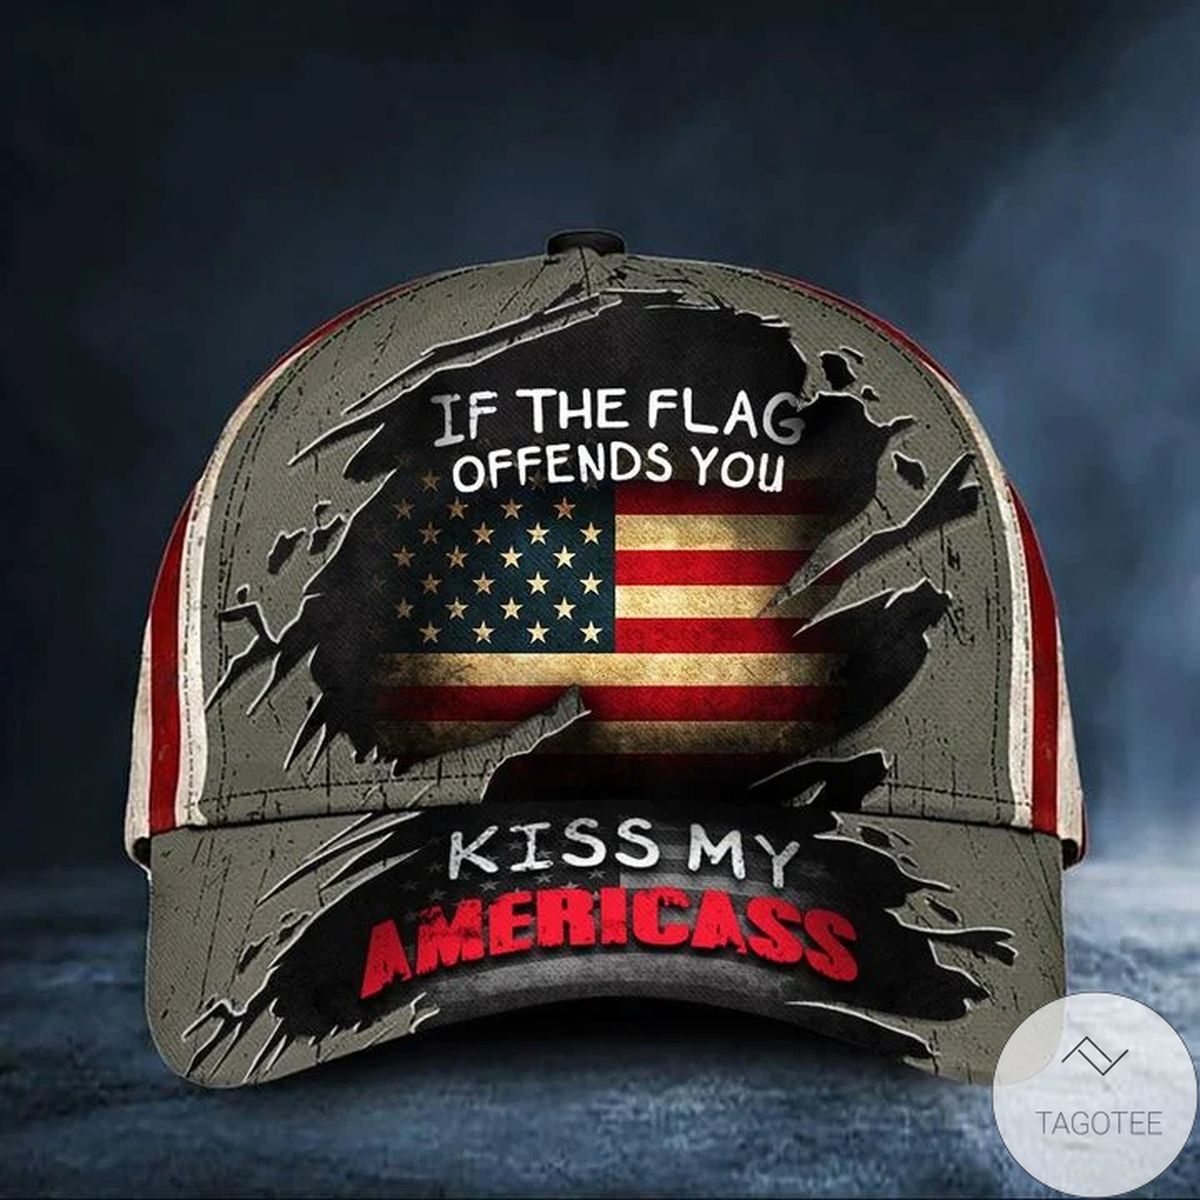 If The Flag Offends You Kiss My Americass Cap Funny American Flag Patriotic Hat Vintage